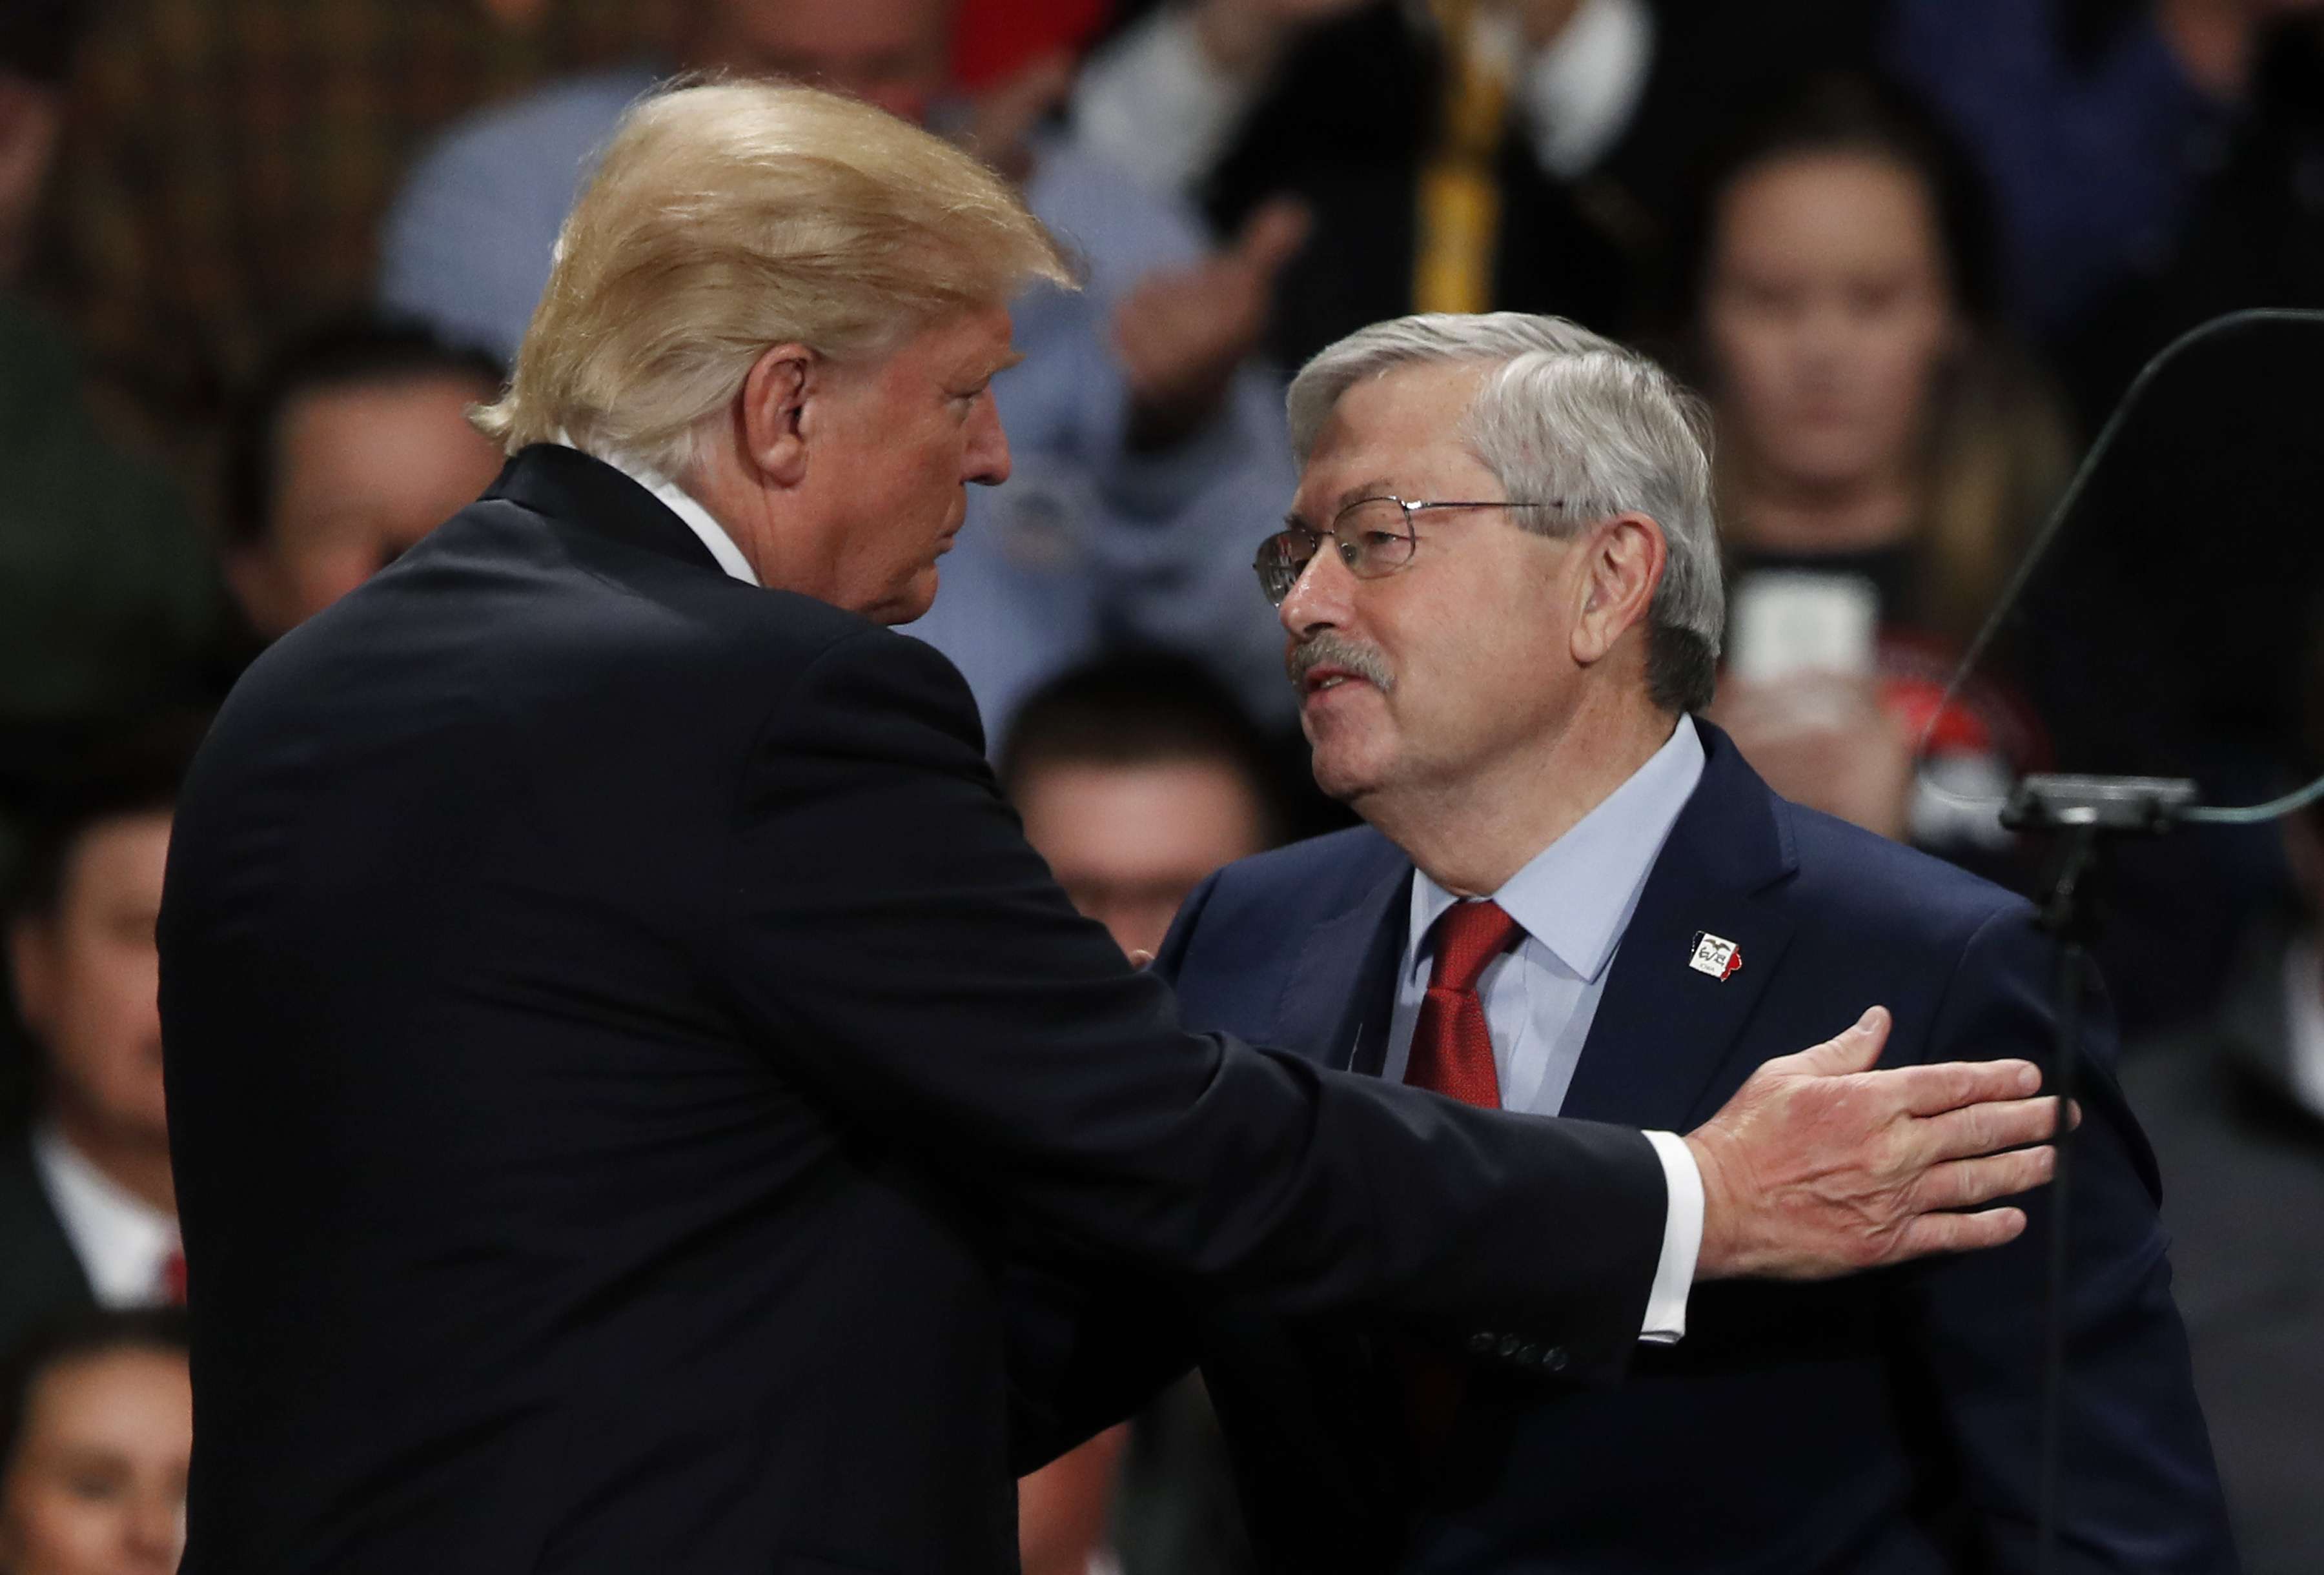 President-elect Donald Trump with Iowa Governor Terry Branstad, his pick for ambassador to China, at a rally in Des Moines on December 8. Branstad has known Chinese President Xi Jinping for more than 30 years. Photo: AP